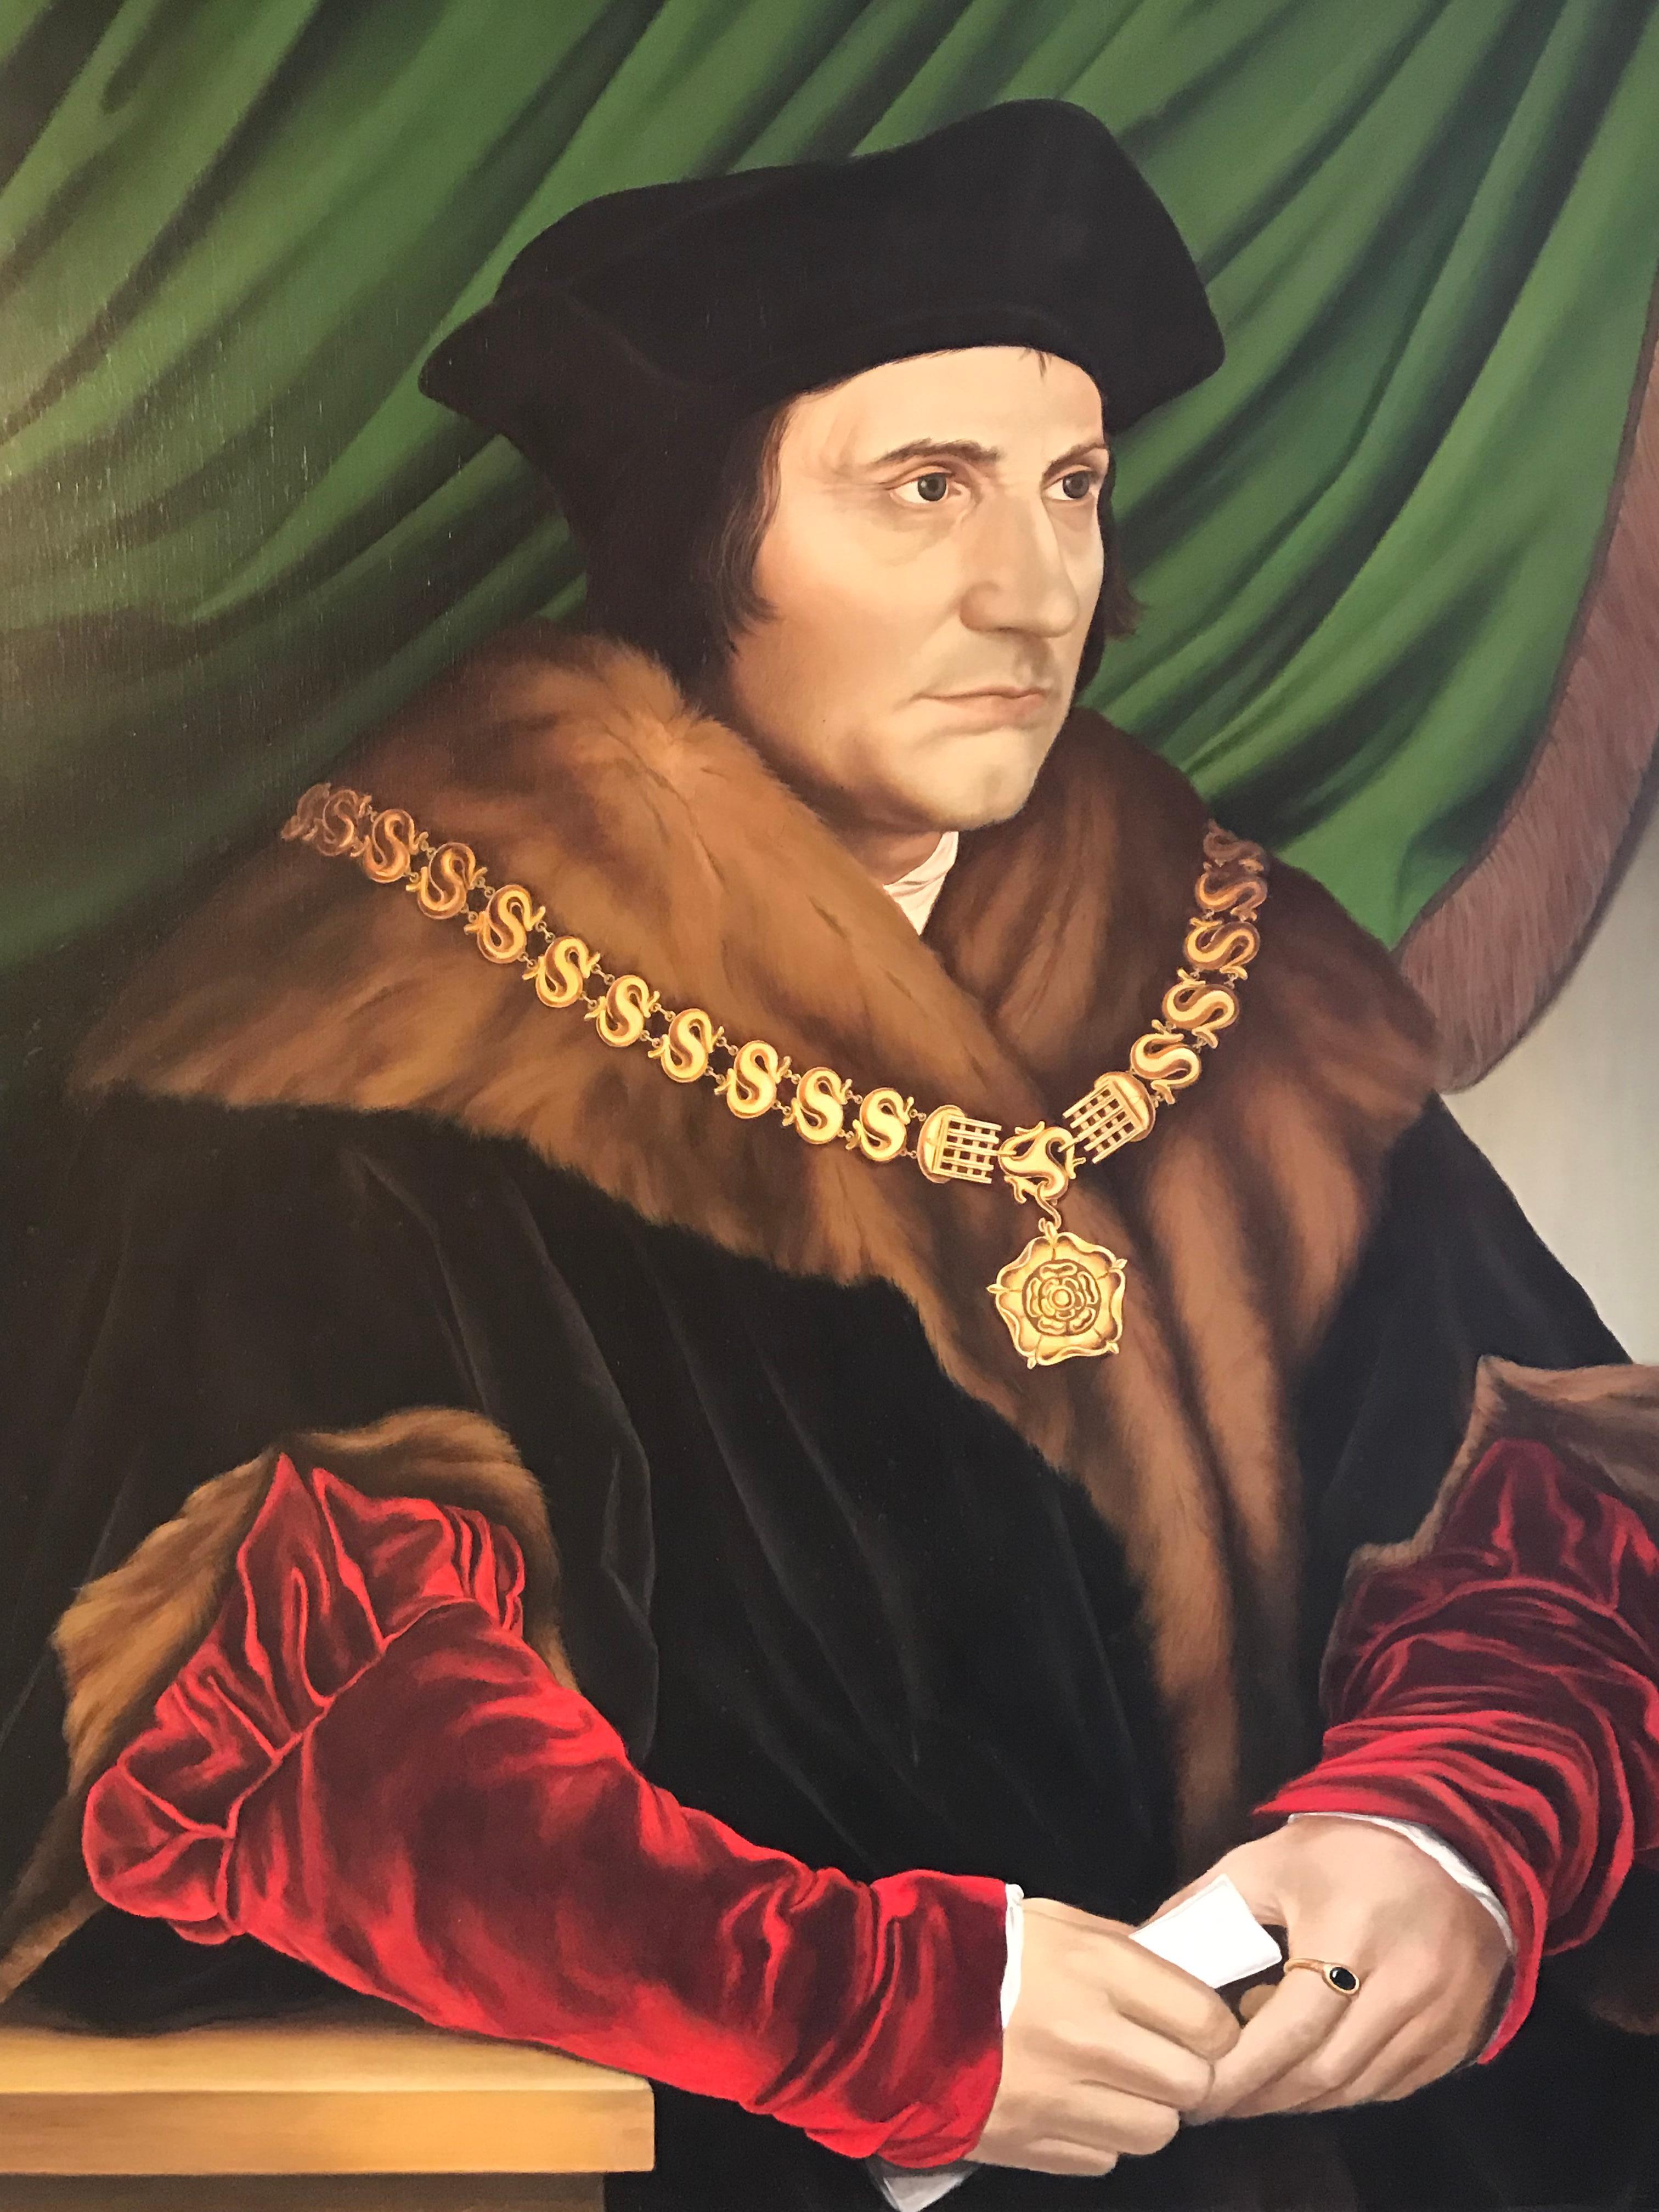 Sir Thomas More (1478-1535)
by Paul Workman, British historical portrait painter (contemporary)
after Hans Holbein
acrylic on board, framed
signed, inscribed and dated 1999 verso
painting: 29.75 x 23.5 inches
framed: 36.5 x 30.5 inches

Very fine,